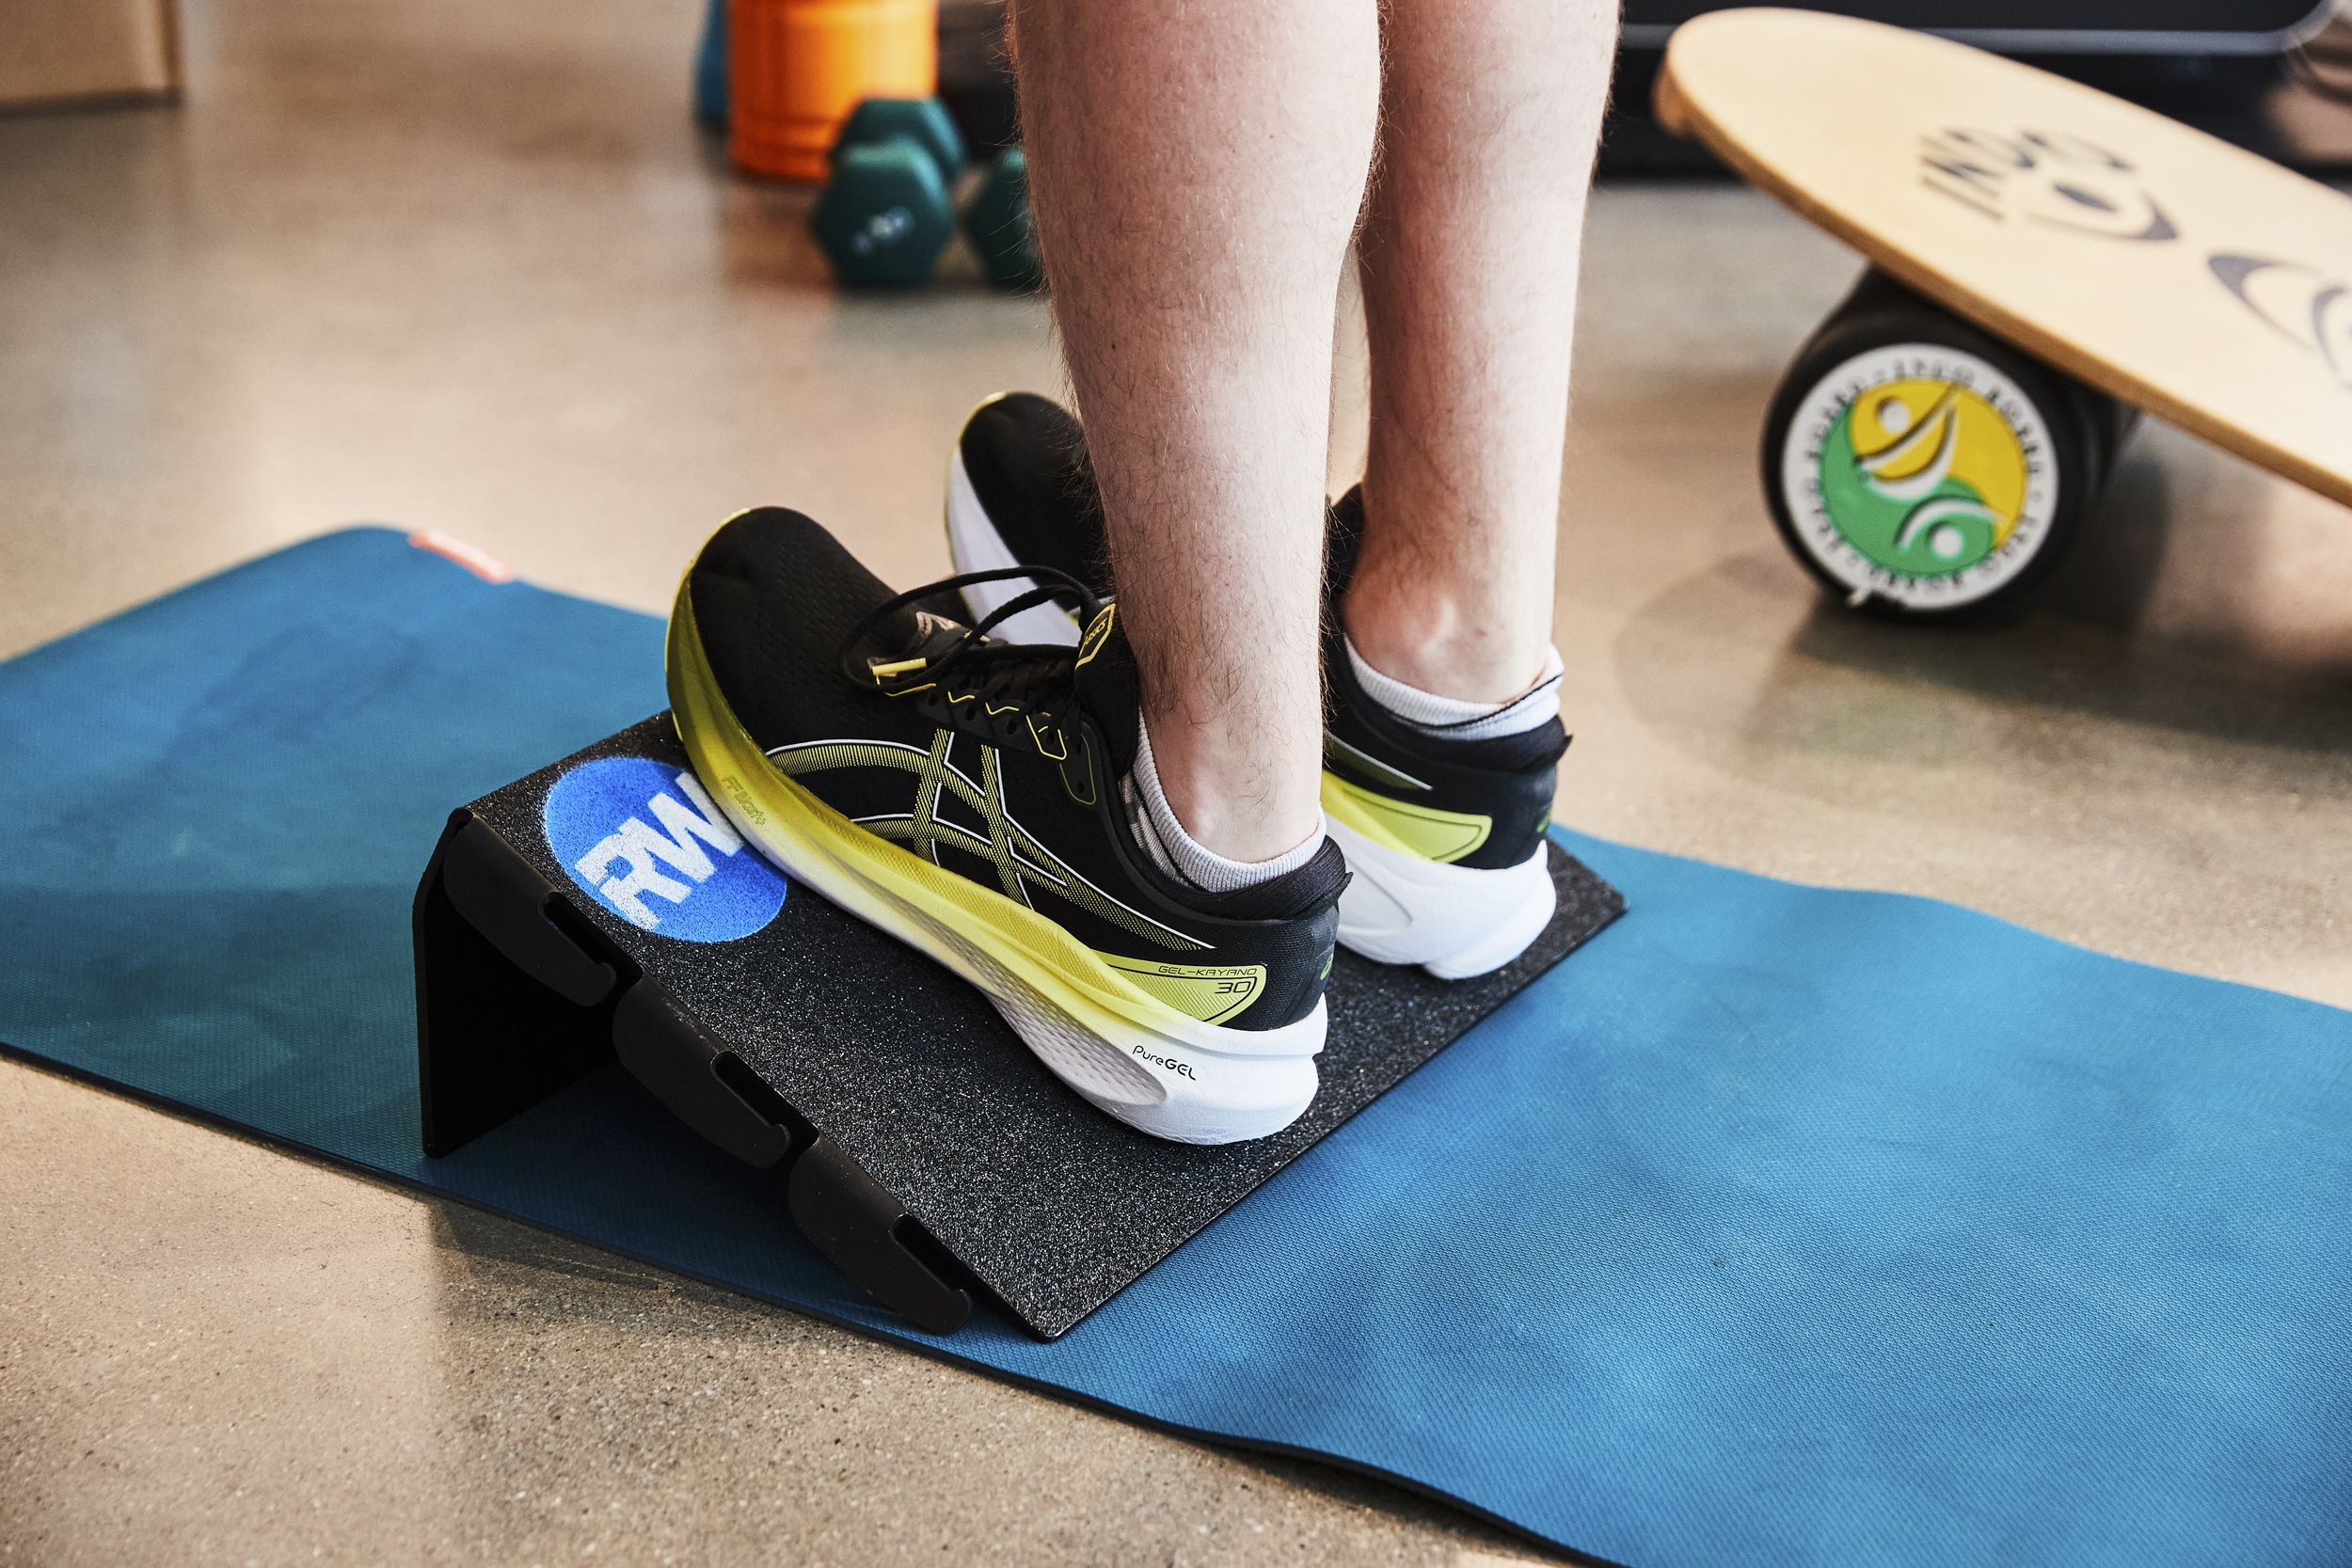 Super Ankles Foot-Fit Board: Ankle Strength & Mobility